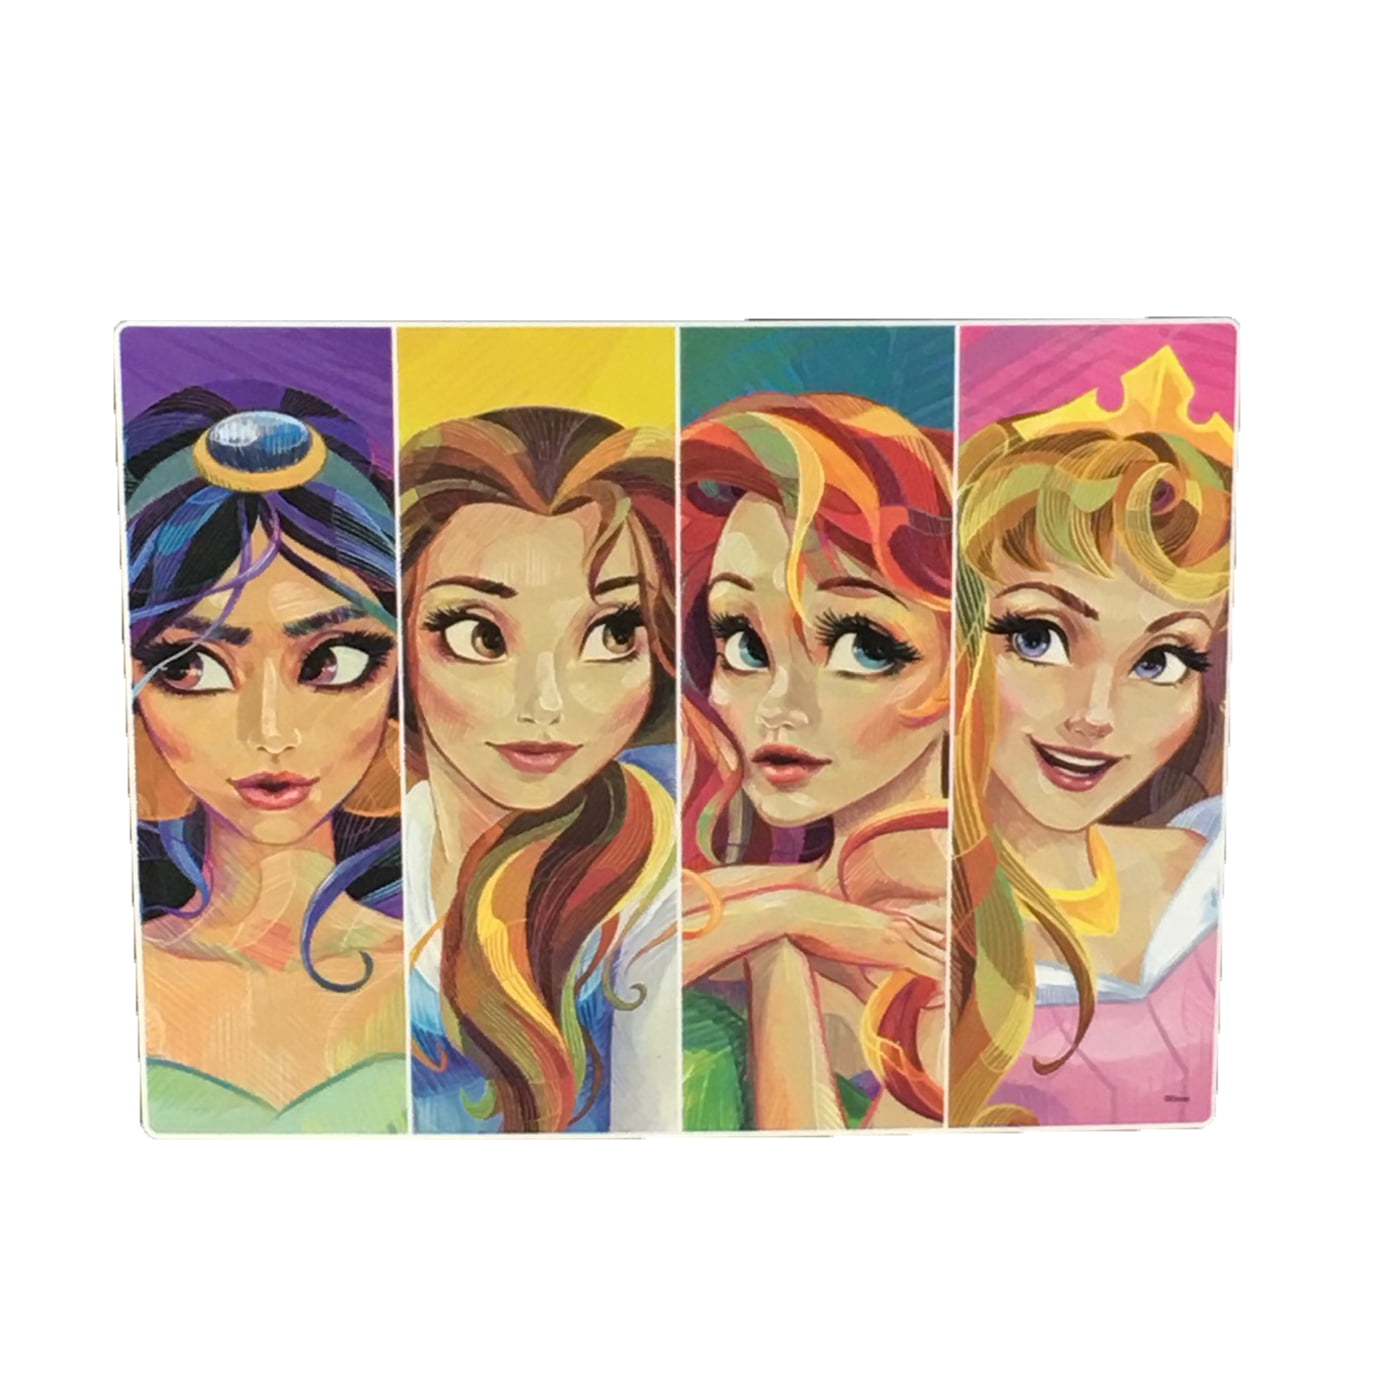 Disney Princesses Collage NEW 500 Piece Jigsaw Puzzle Cardinal 14 in x 11 in. 